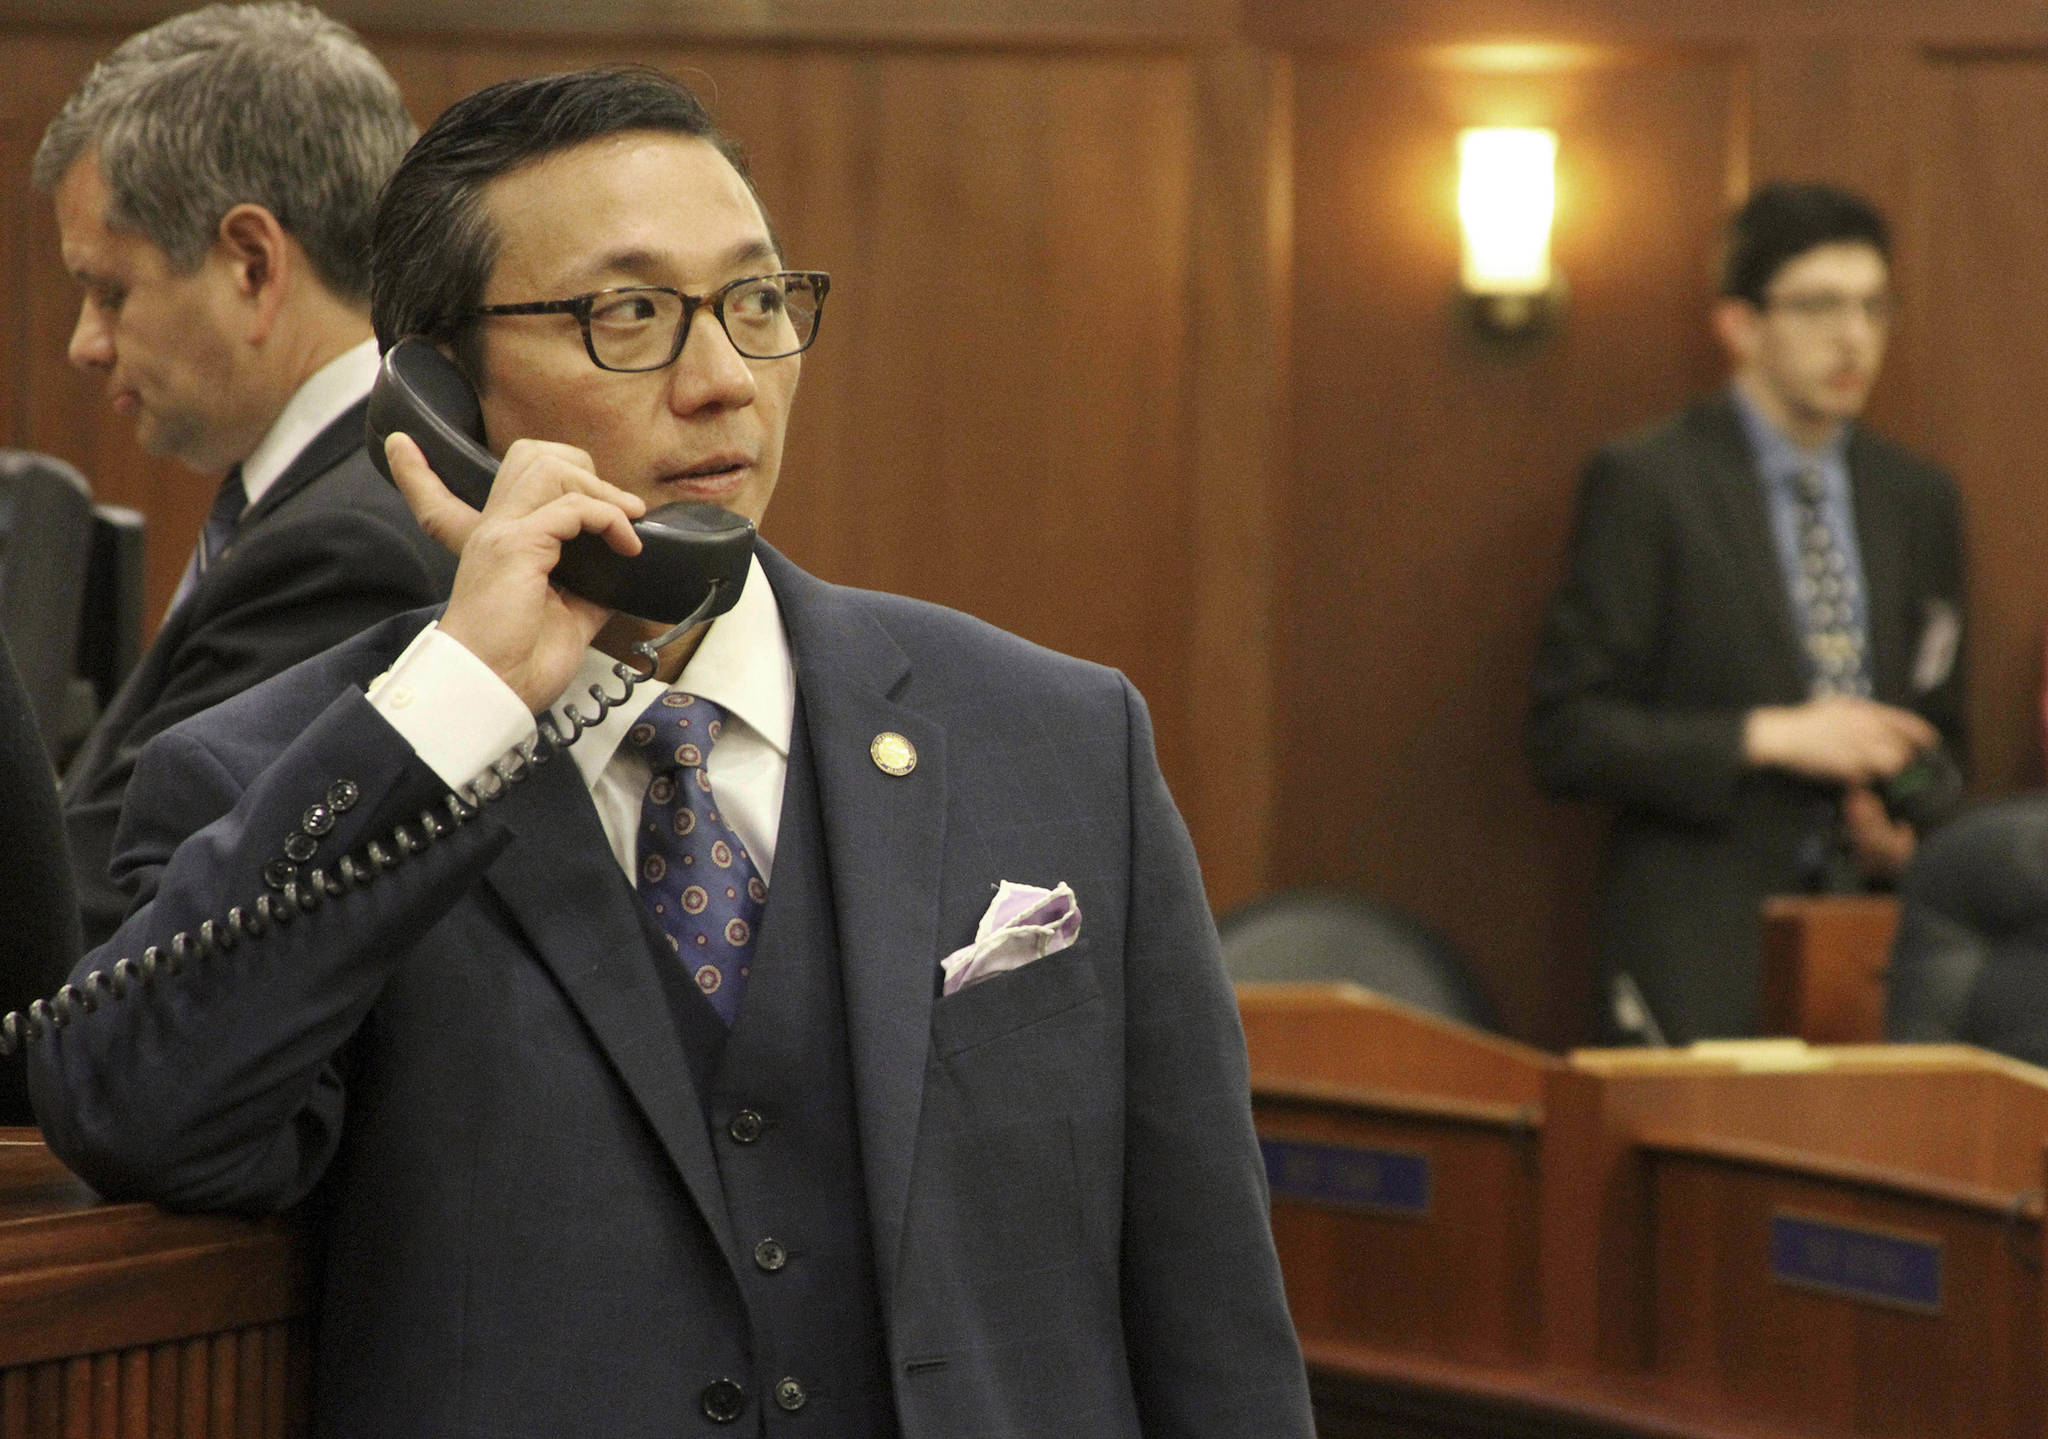 This Jan. 16 photo shows Alaska state Rep. Scott Kawasaki, a Fairbanks Democrat, talking on a telephone before the start of the legislative session at the state Capitol in Juneau, Alaska. Republican Alaska Senate President Pete Kelly appears to have lost his re-election bid but told The Associated Press that he’s leaving open the option of a recount. Ballots tallied Friday, Nov. 16, 2018 show Kawasaki widening his lead to 173 votes in the Fairbanks race. (Mark Thiessen | The Associated Press File)